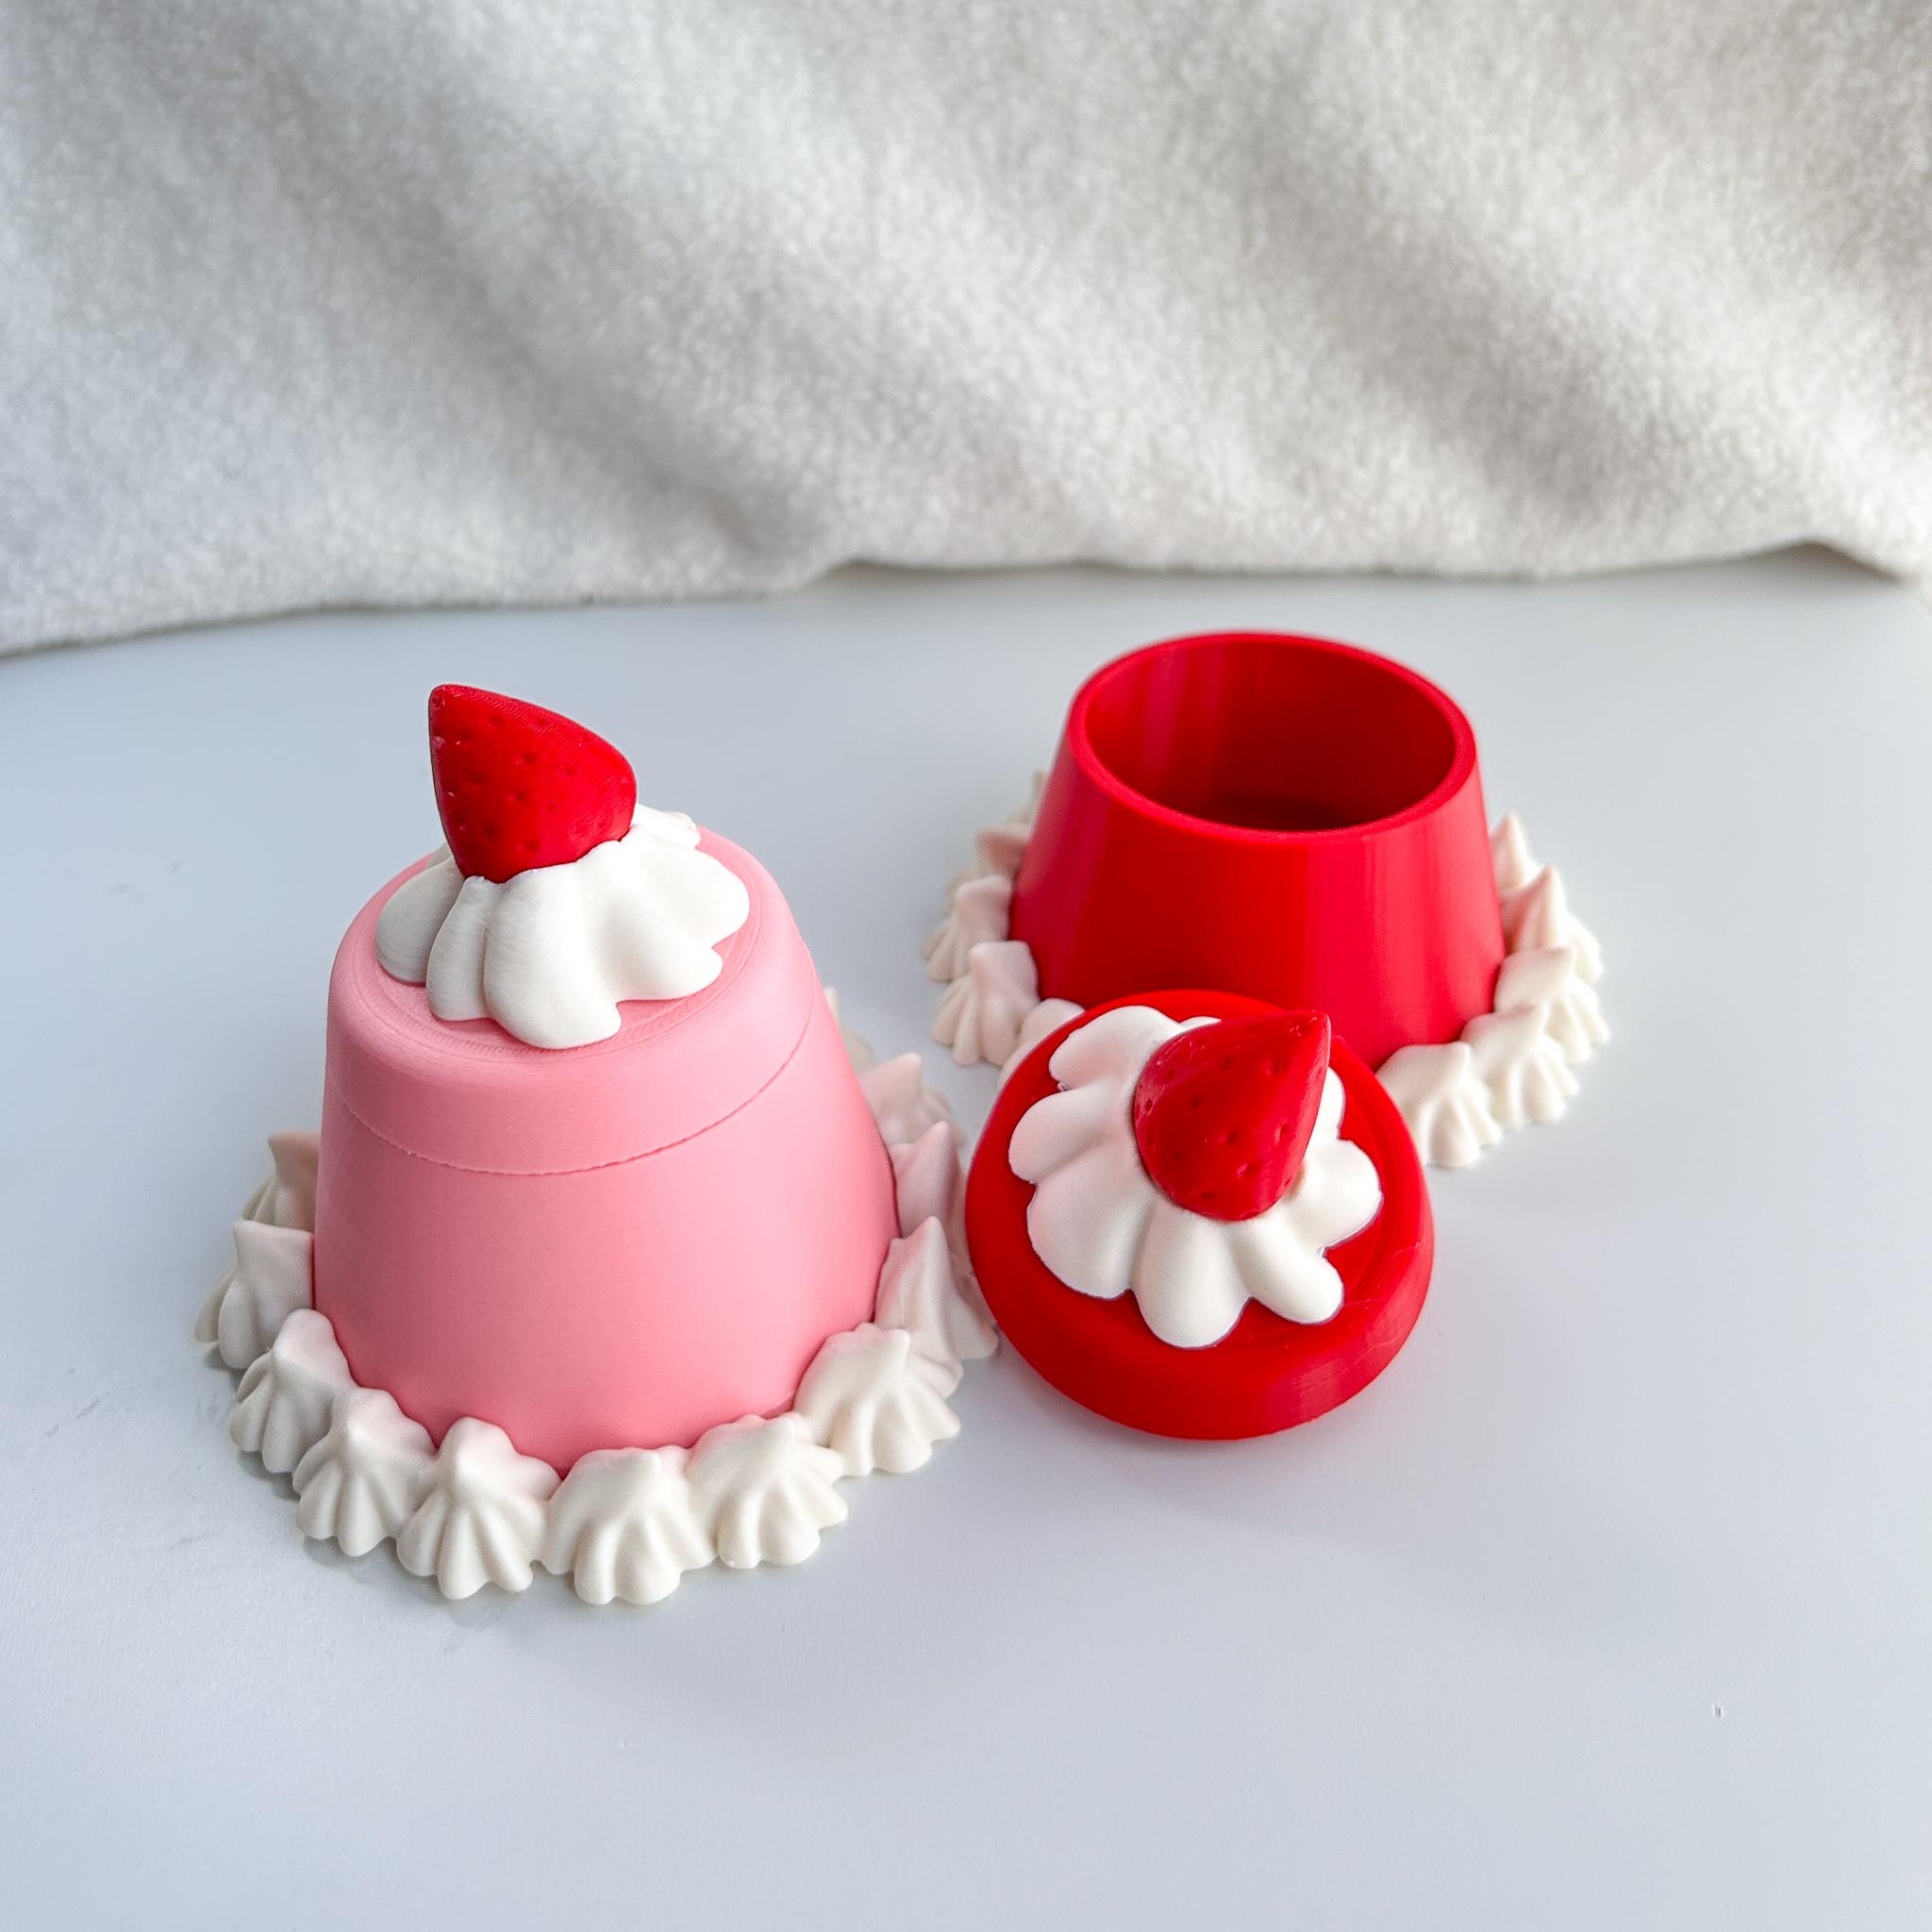 Strawberry Whip Pudding Jewelry Box - Kitsch Container and Gift Holder 3d model